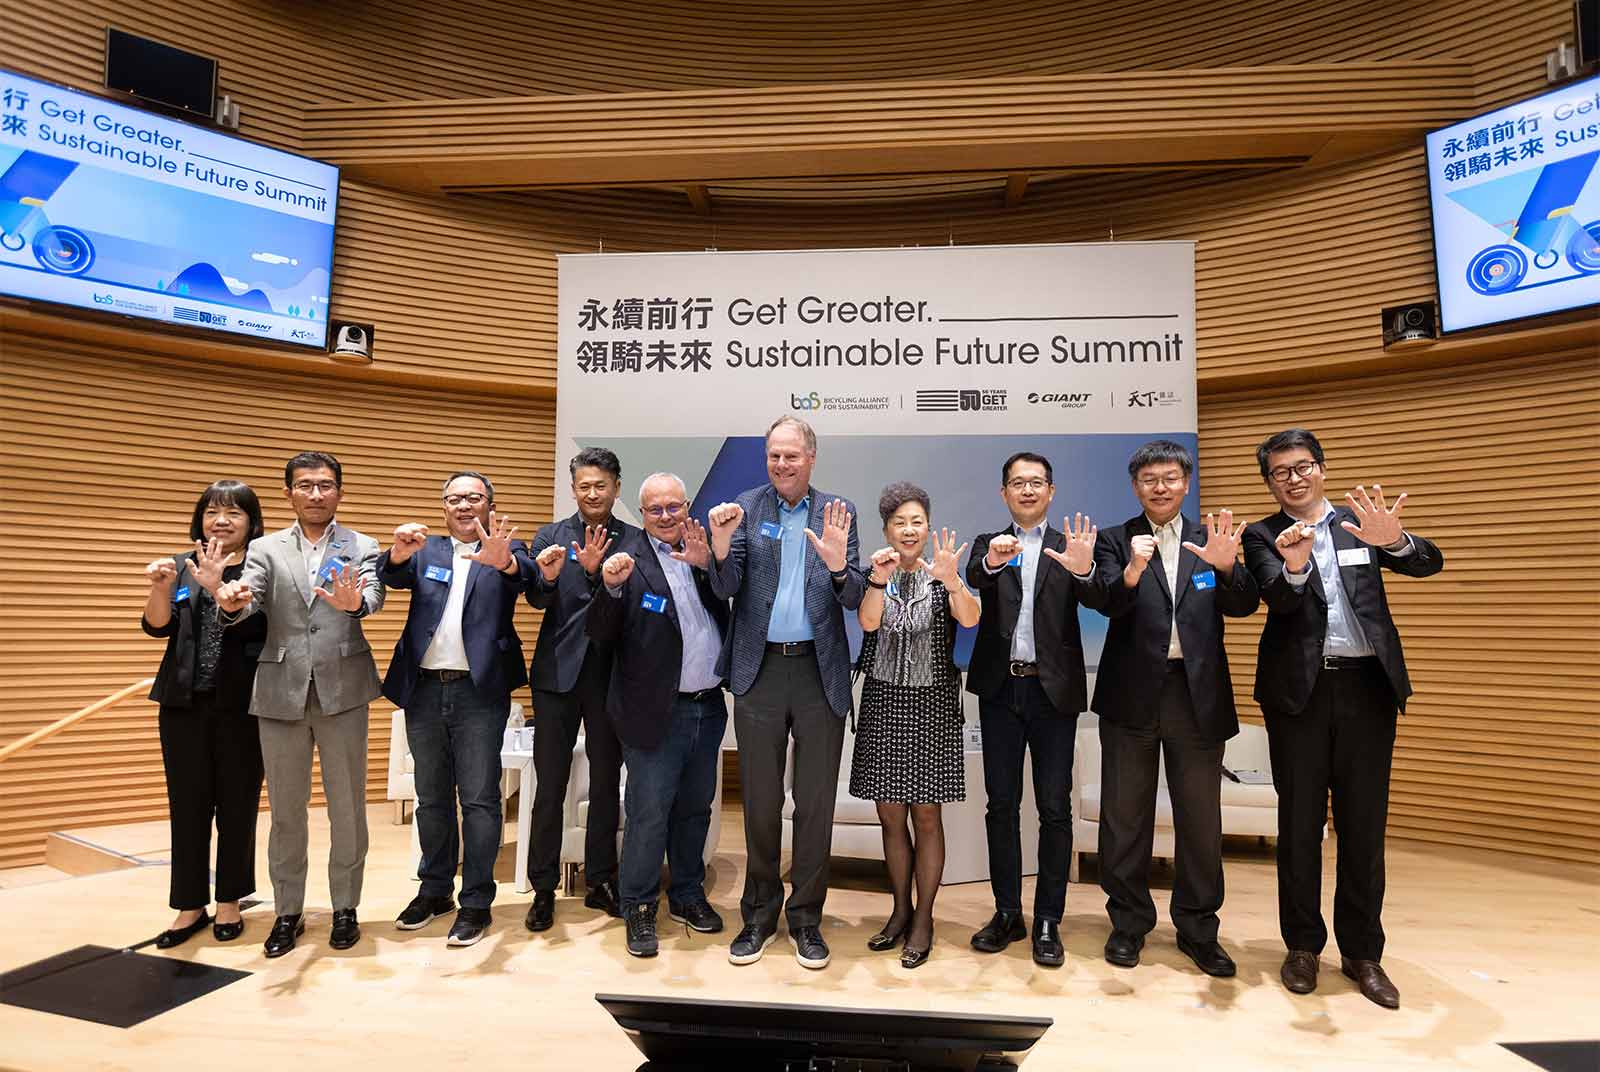 Get Greater - Giant Group’s 50th Anniversary Sustainable Future Summit